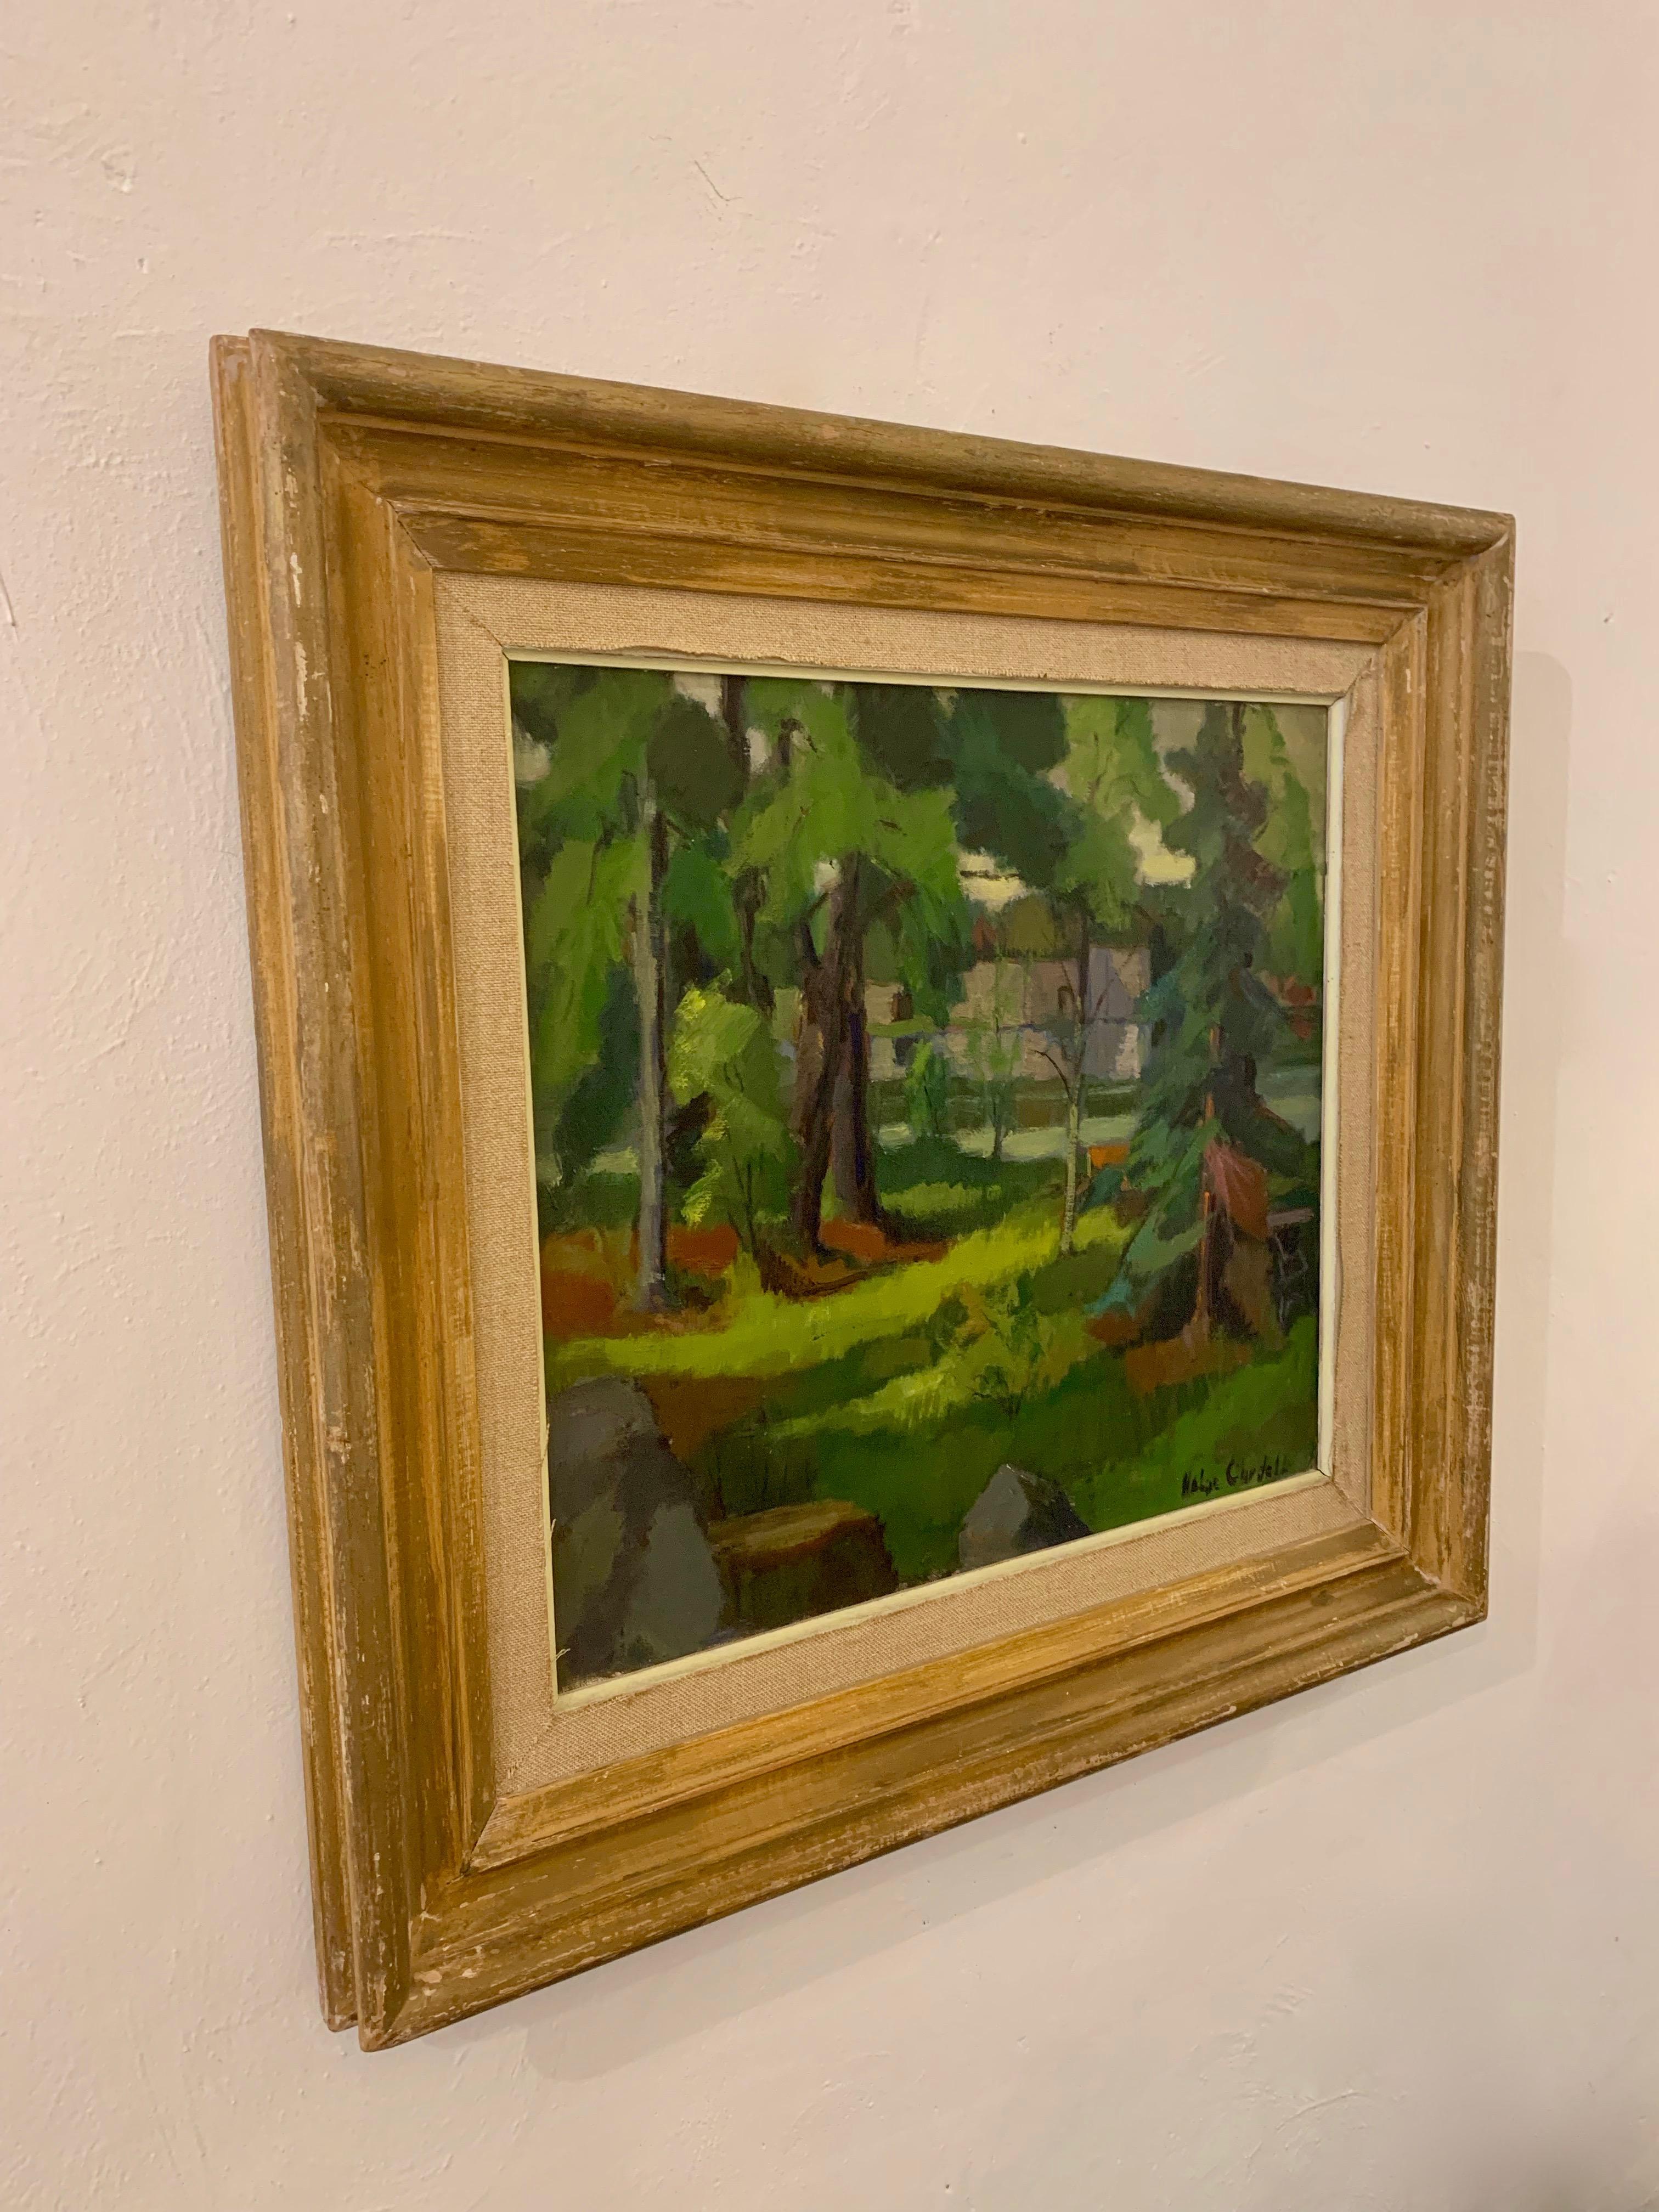 Wonderful intense fresh green abstract forest midcentury gouache painting by Swedish artist Helge Cardell (1902-1972). Born and raised in Malmö, Cardell started painting in the 1920s. Education: Skåne Painter School in Malmö, where he also worked as